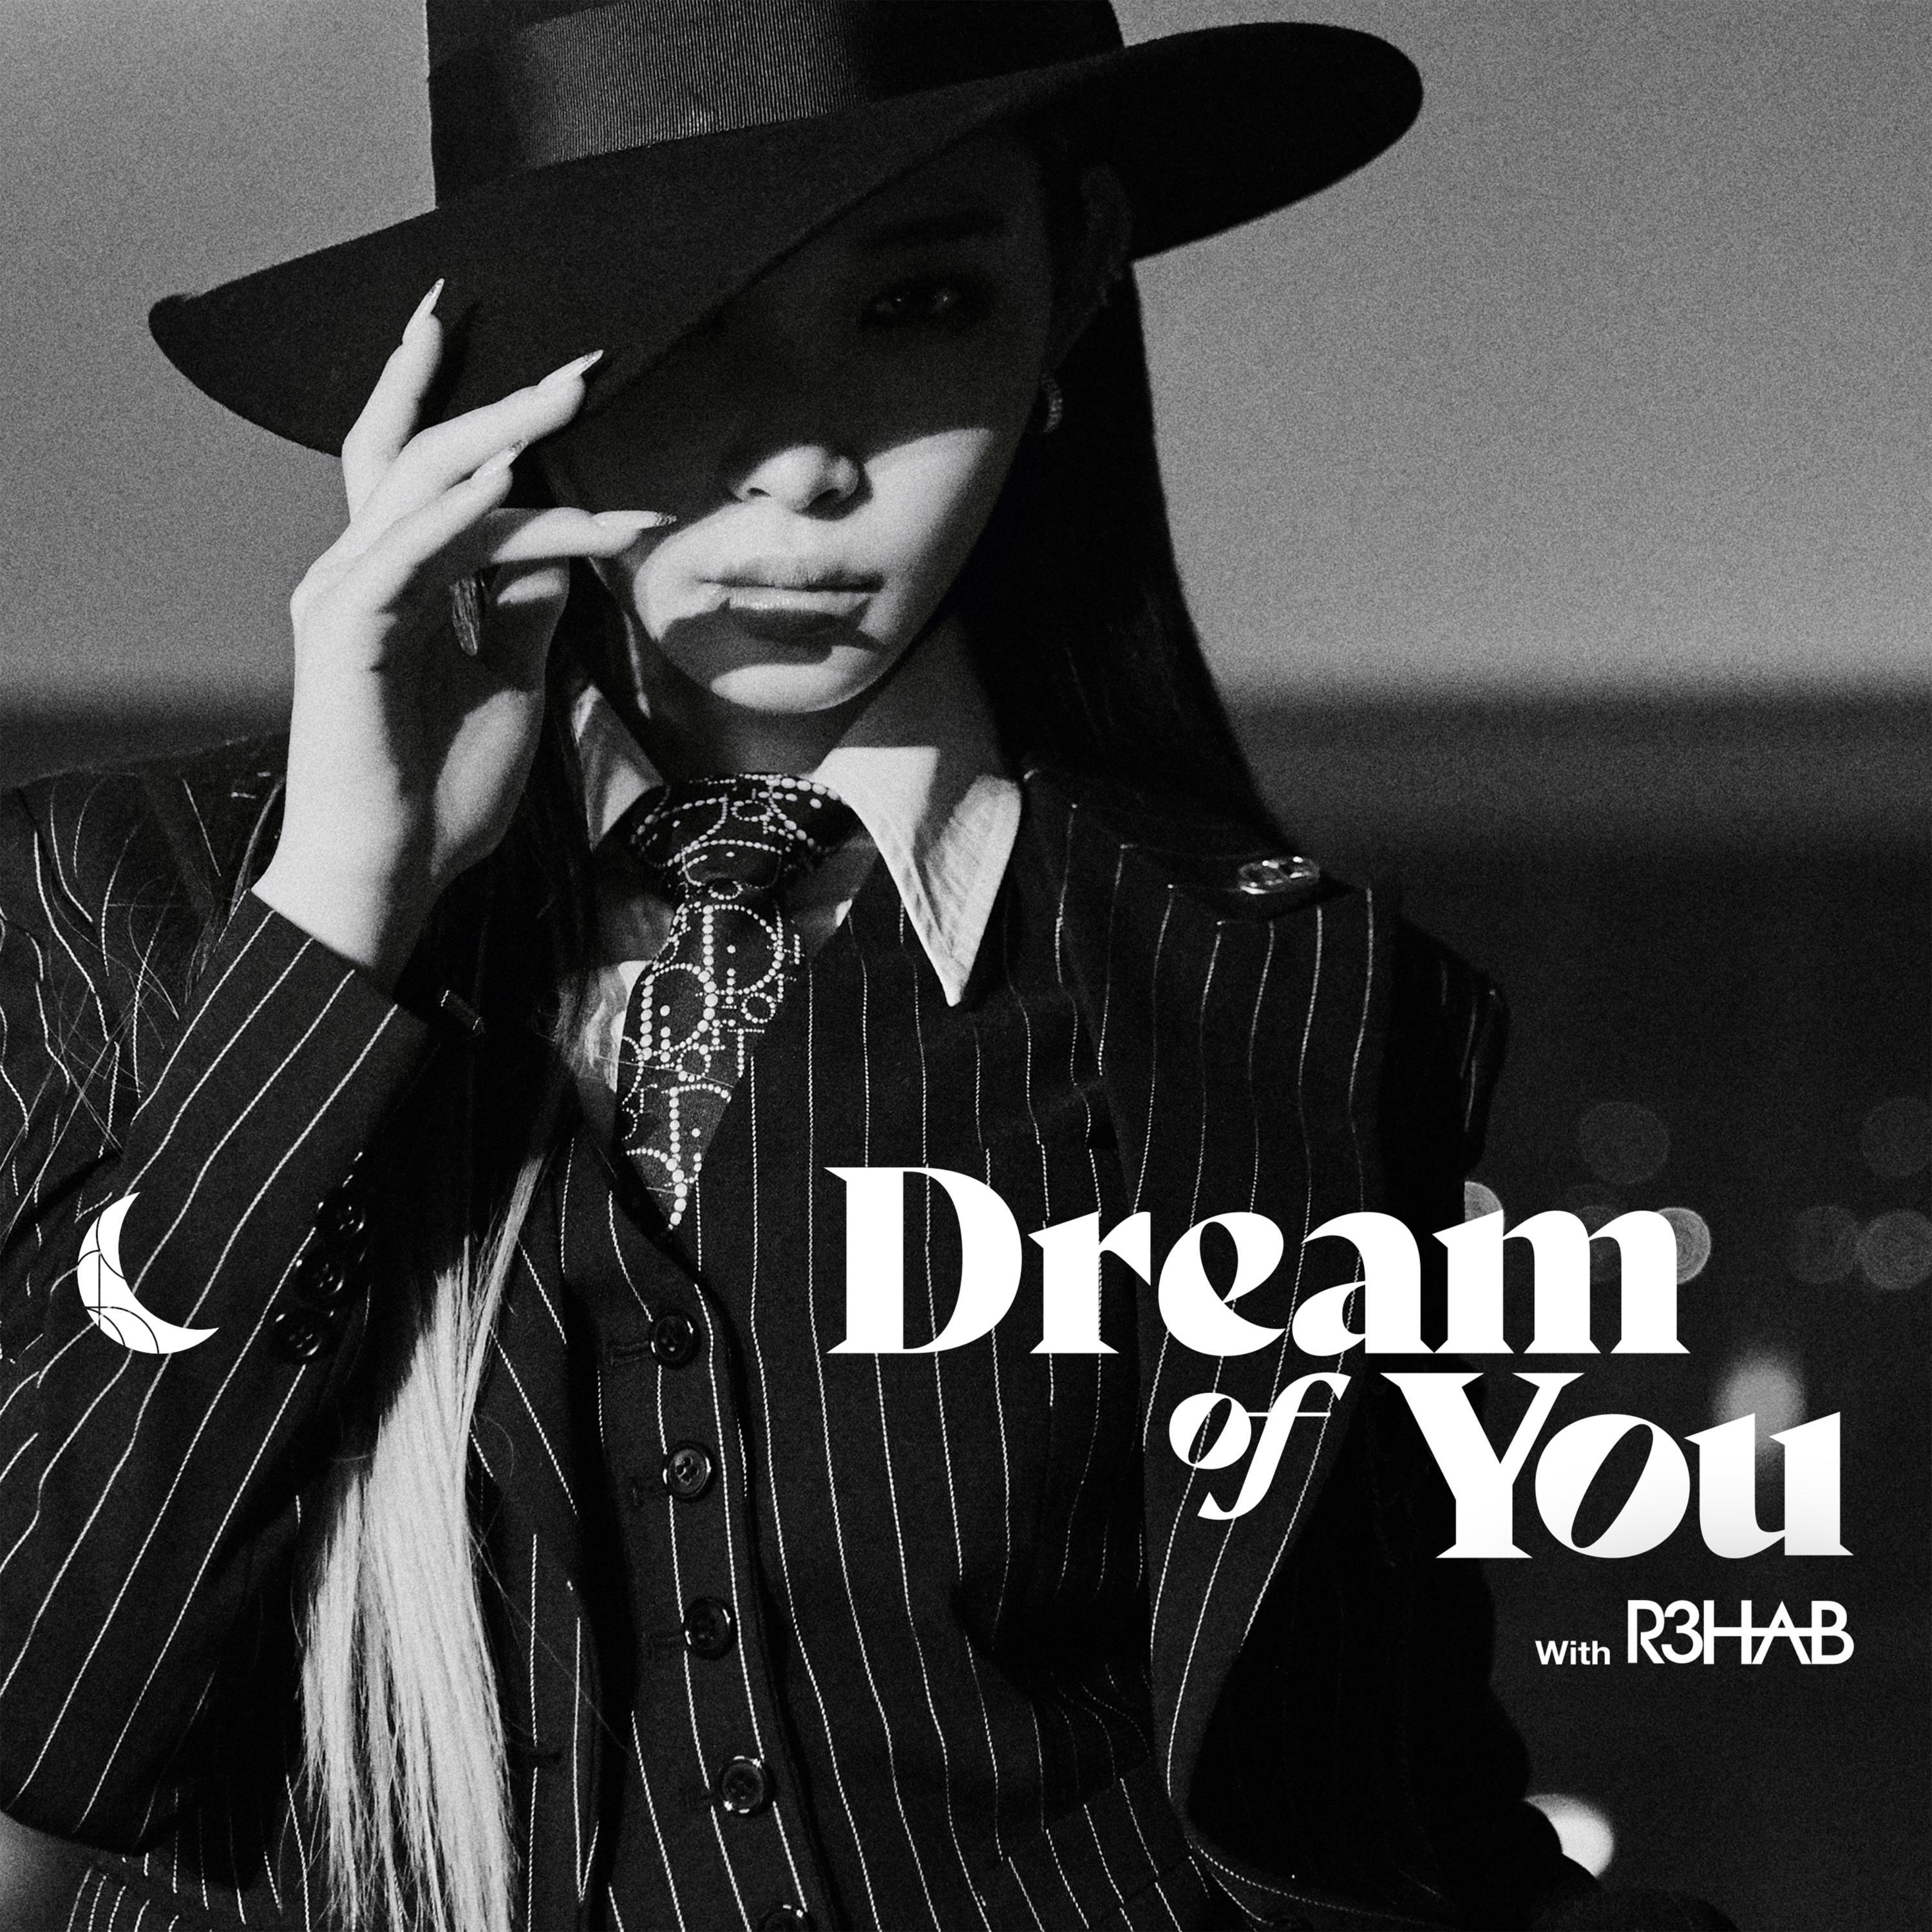 Dream of You (with R3HAB)歌词 歌手金请夏 / R3HAB-专辑Dream of You (with R3HAB)-单曲《Dream of You (with R3HAB)》LRC歌词下载